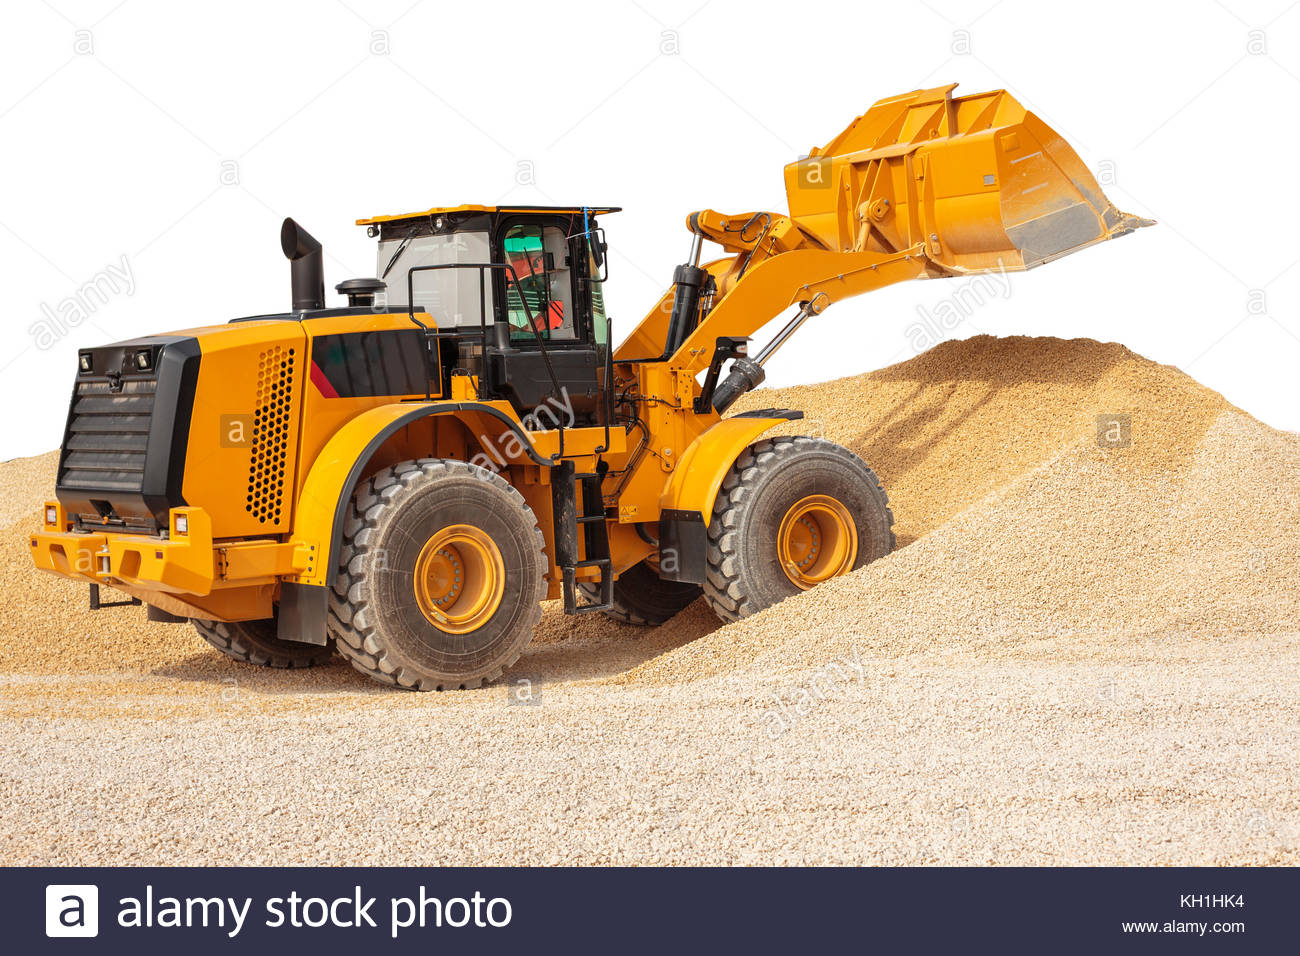 Backhoe Loader Or Bulldozer Excavator With Clipping Path